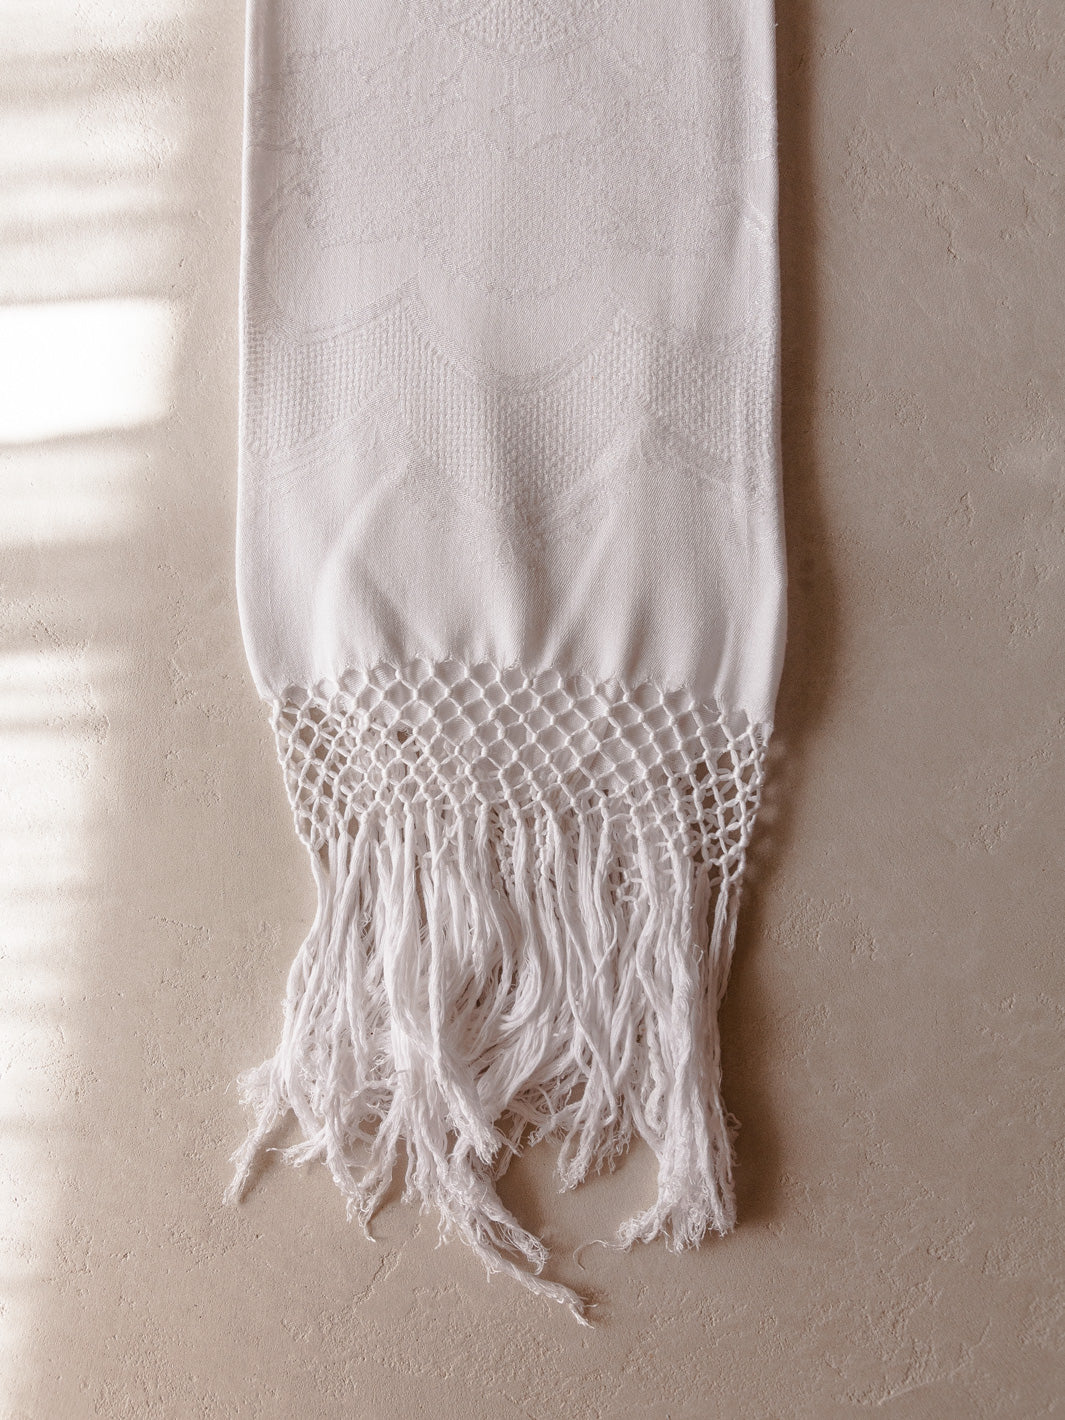 Italian embroidered damask towel from the 40s